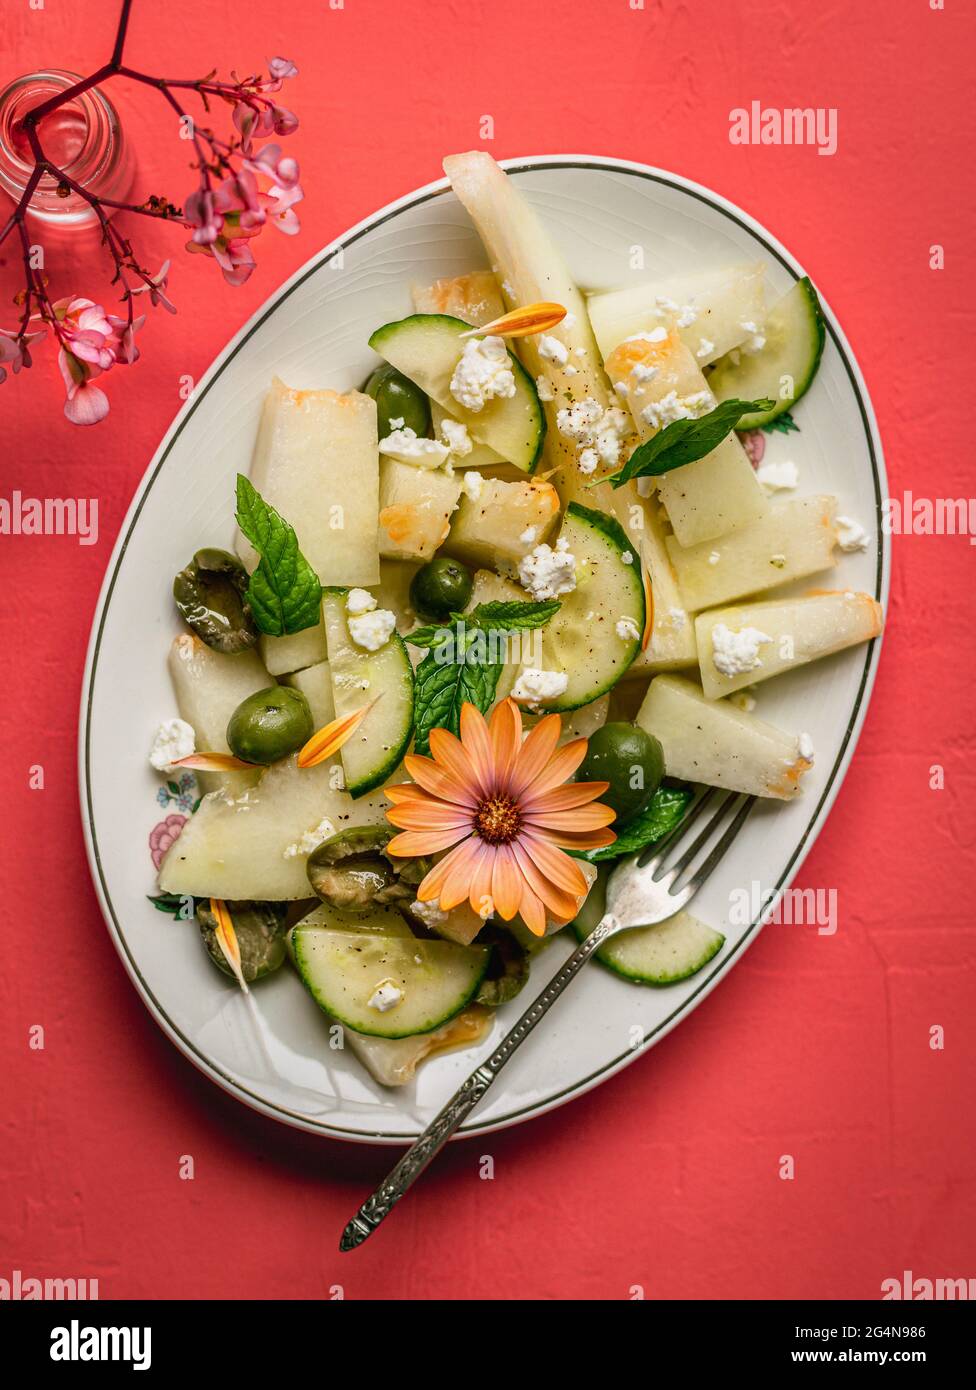 Top view of delicious melon salad with cucumbers and olives served on plate with herbs near salt shaker and napkin on red background Stock Photo